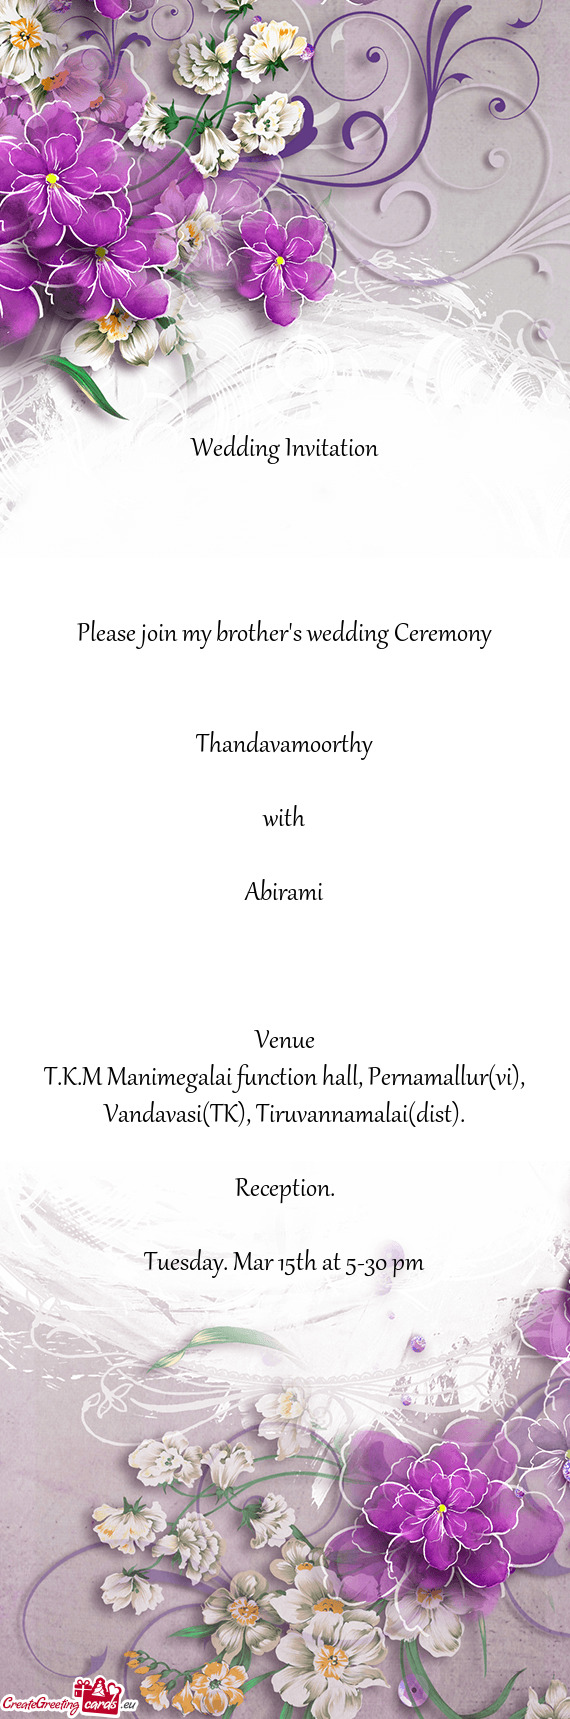 Wedding Invitation
 
 
 
 
 Please join my brother